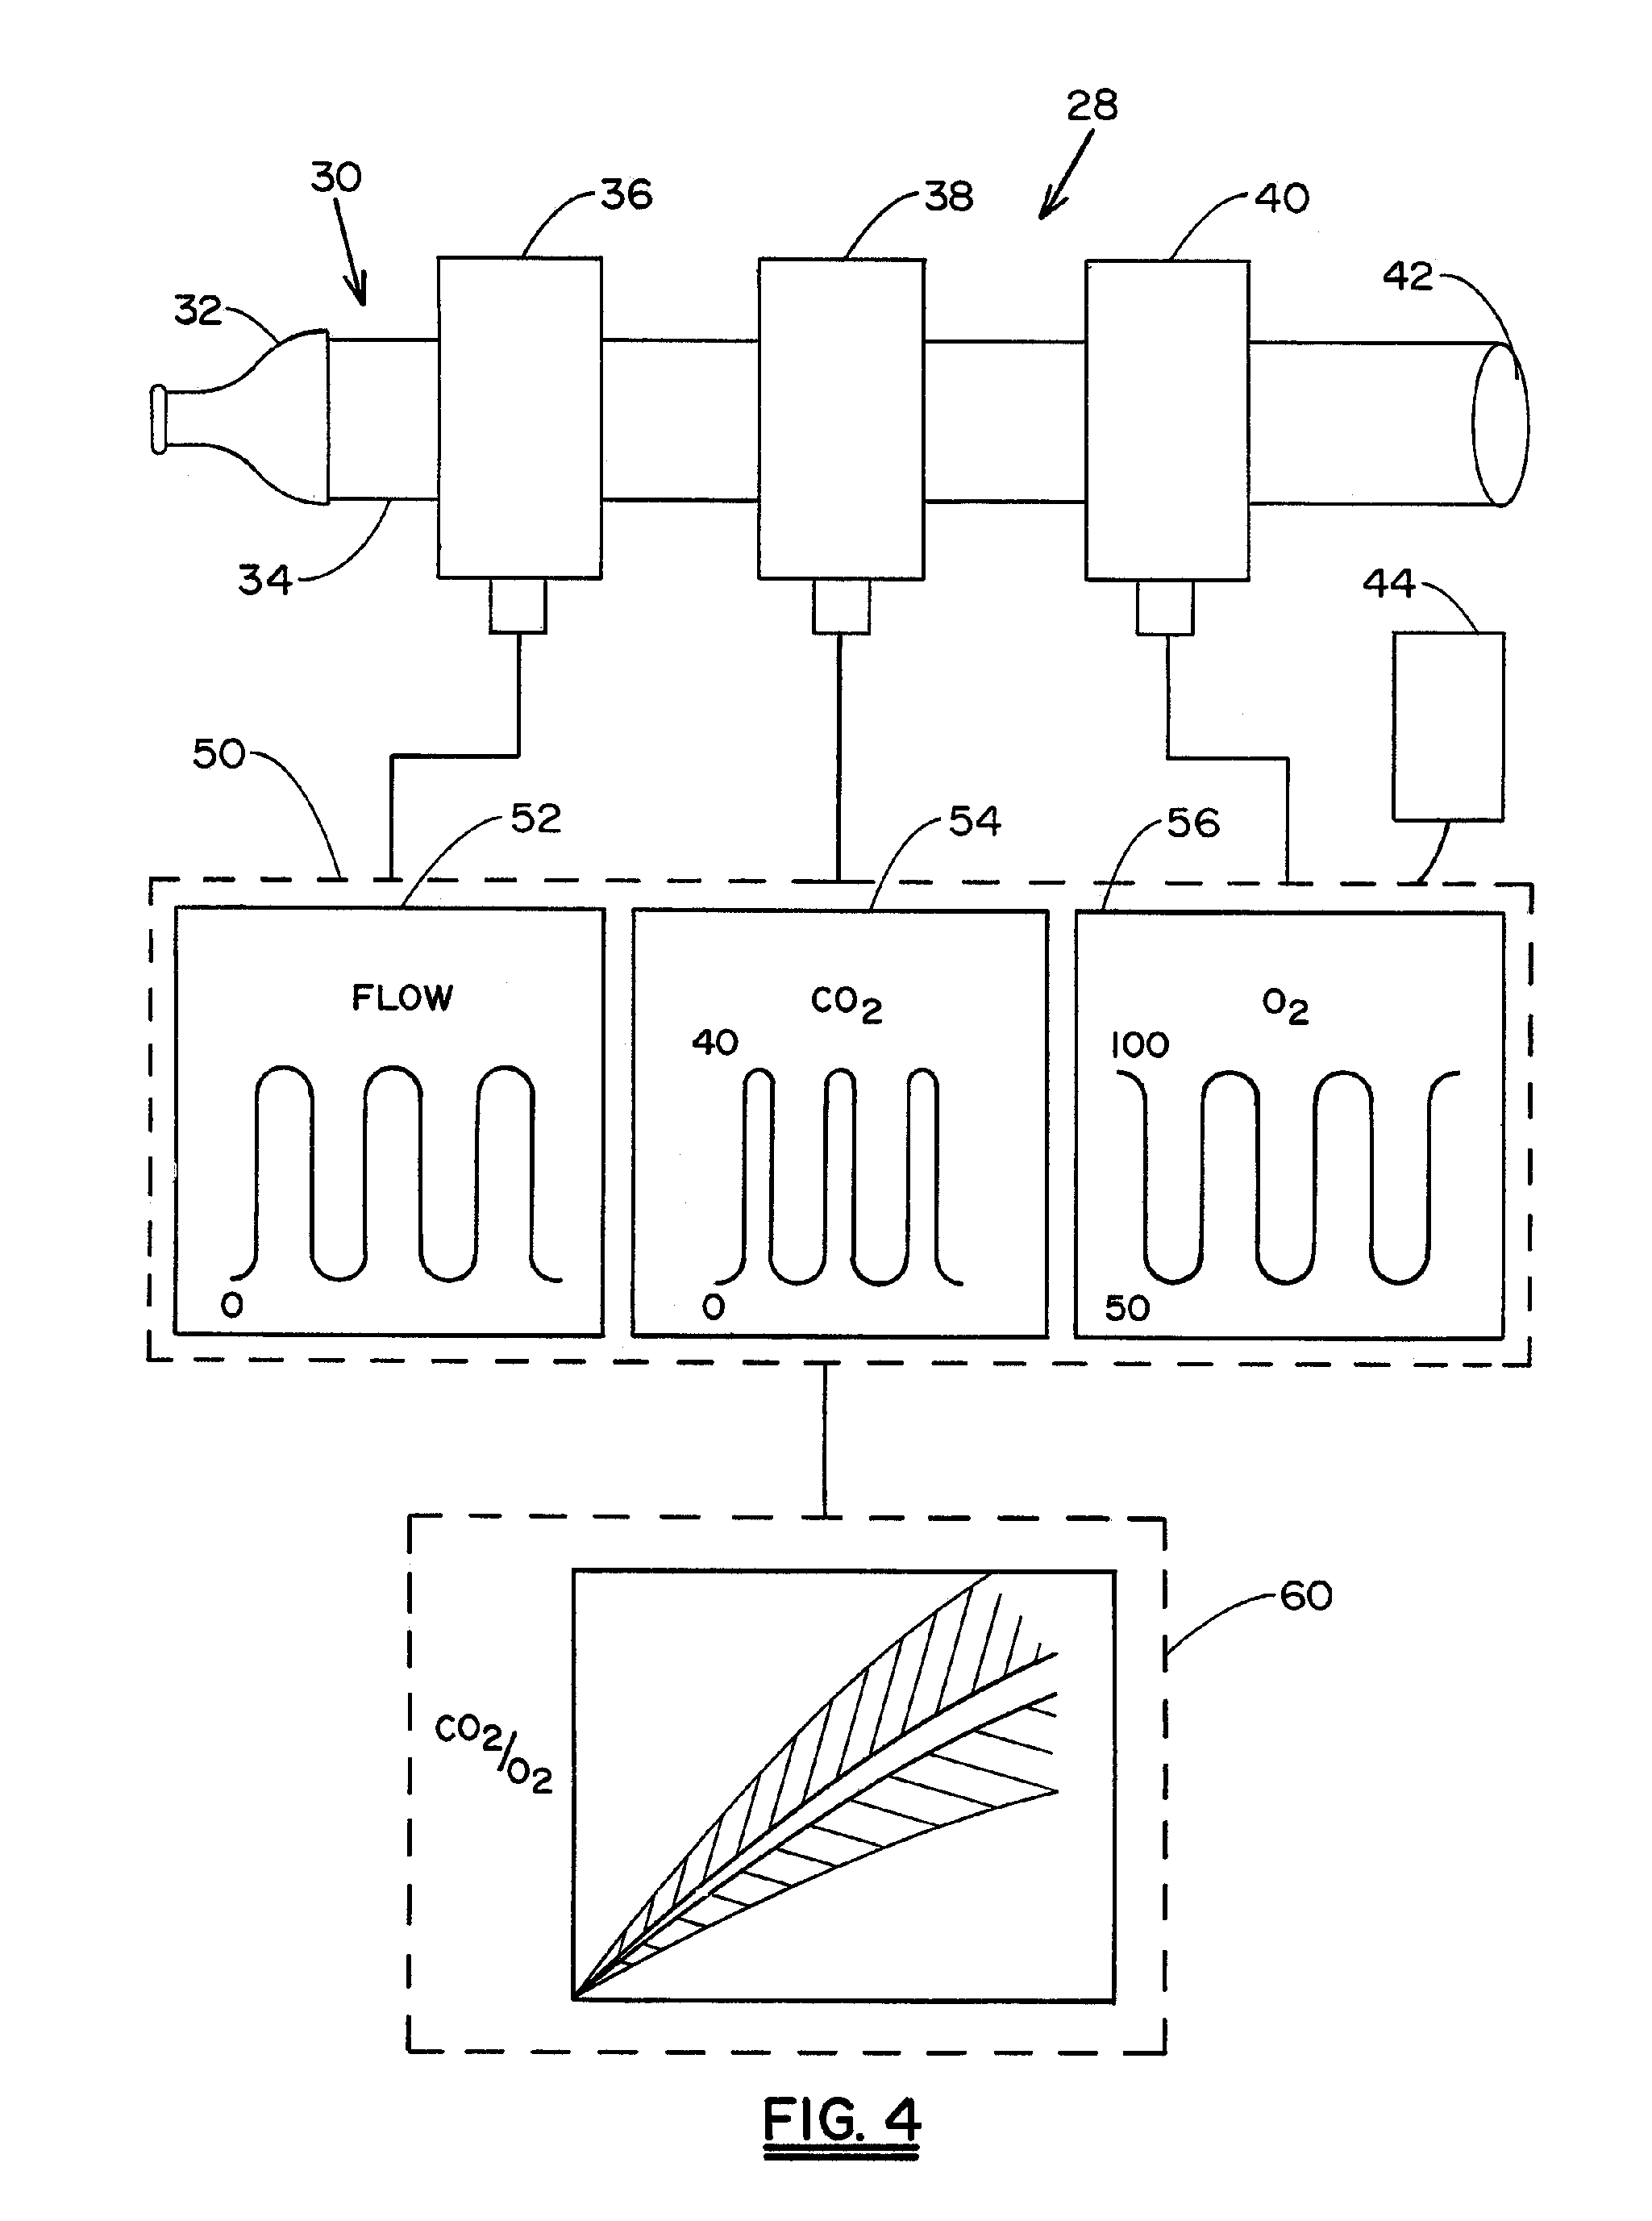 Non-invasive device and method for the diagnosis of pulmonary vascular occlusions